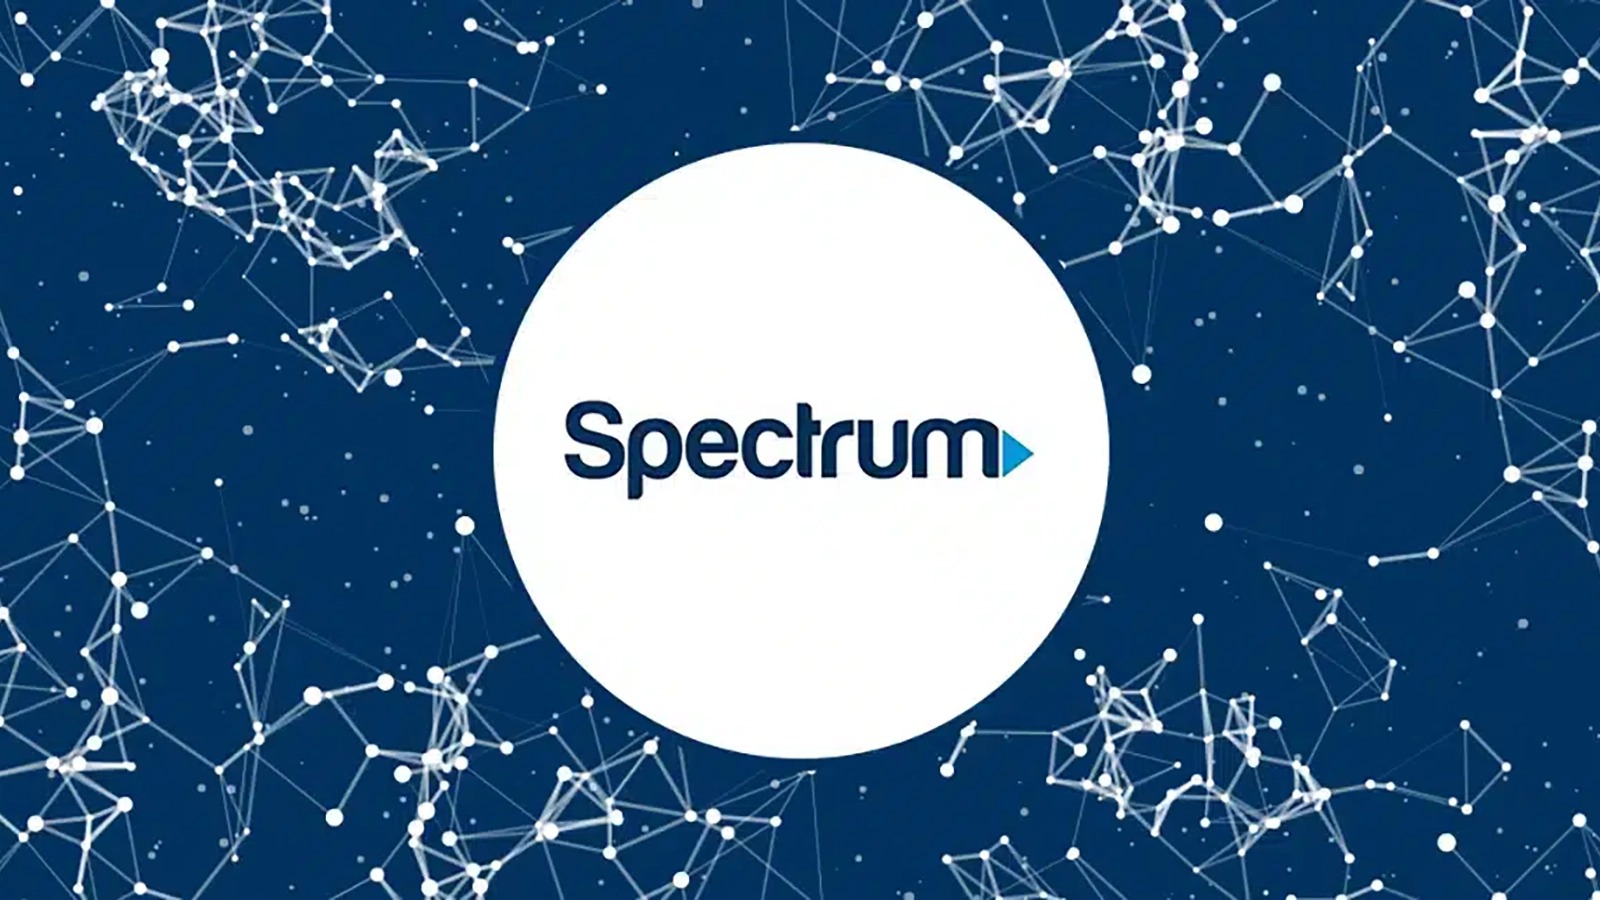 What Is The Billing Cycle For Spectrum?